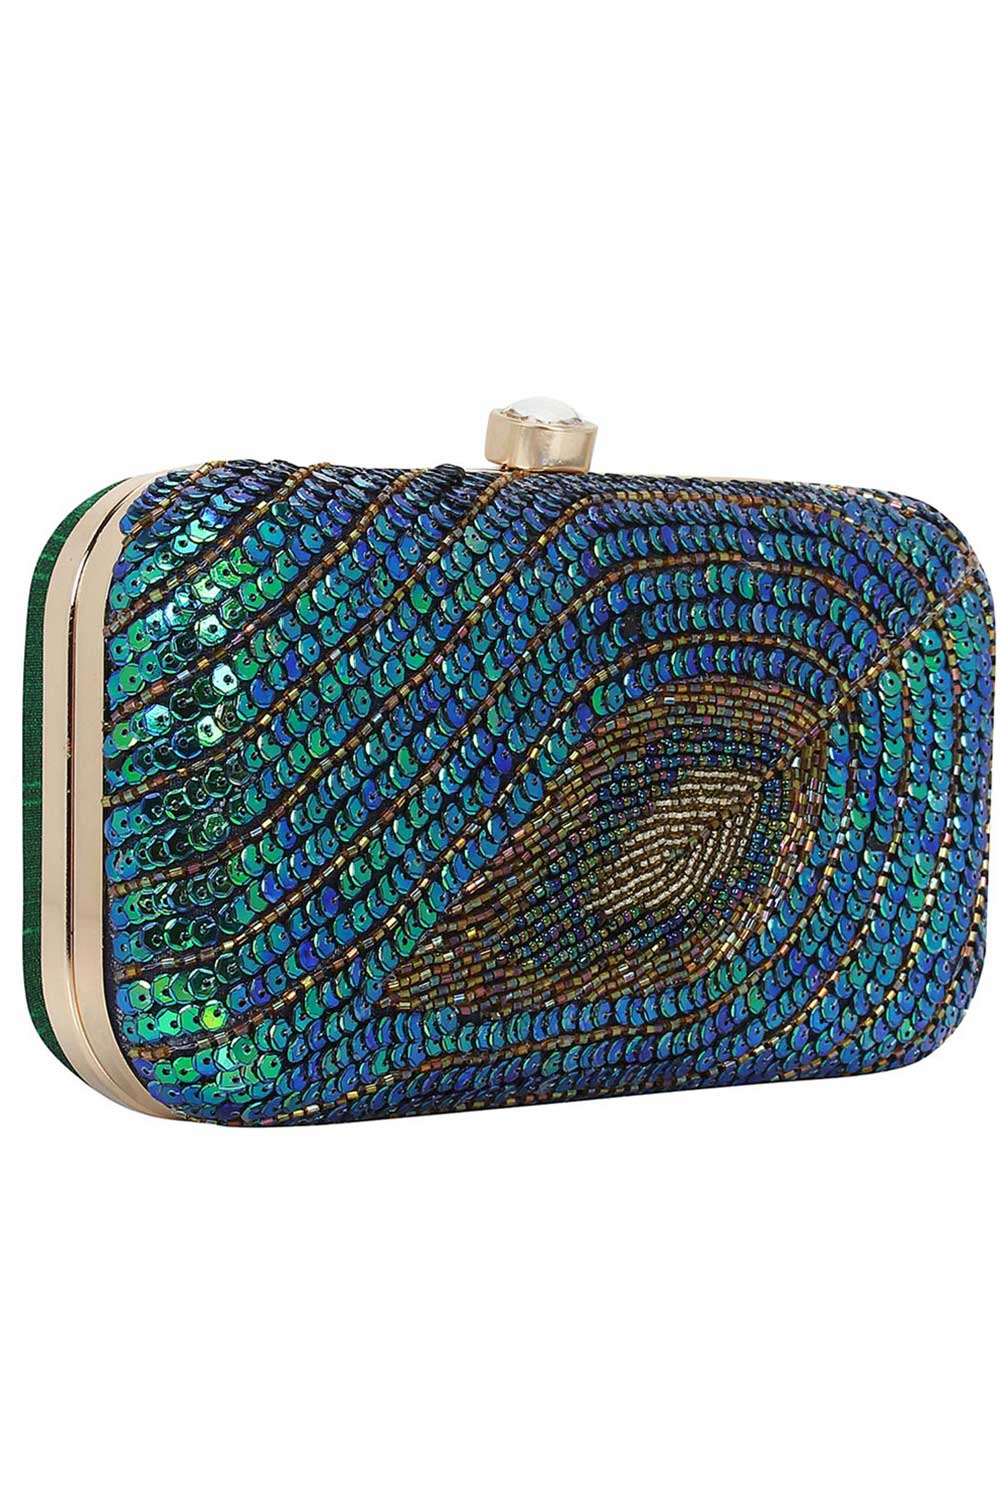 Ethnique Blue and Green Party Clutch Bag